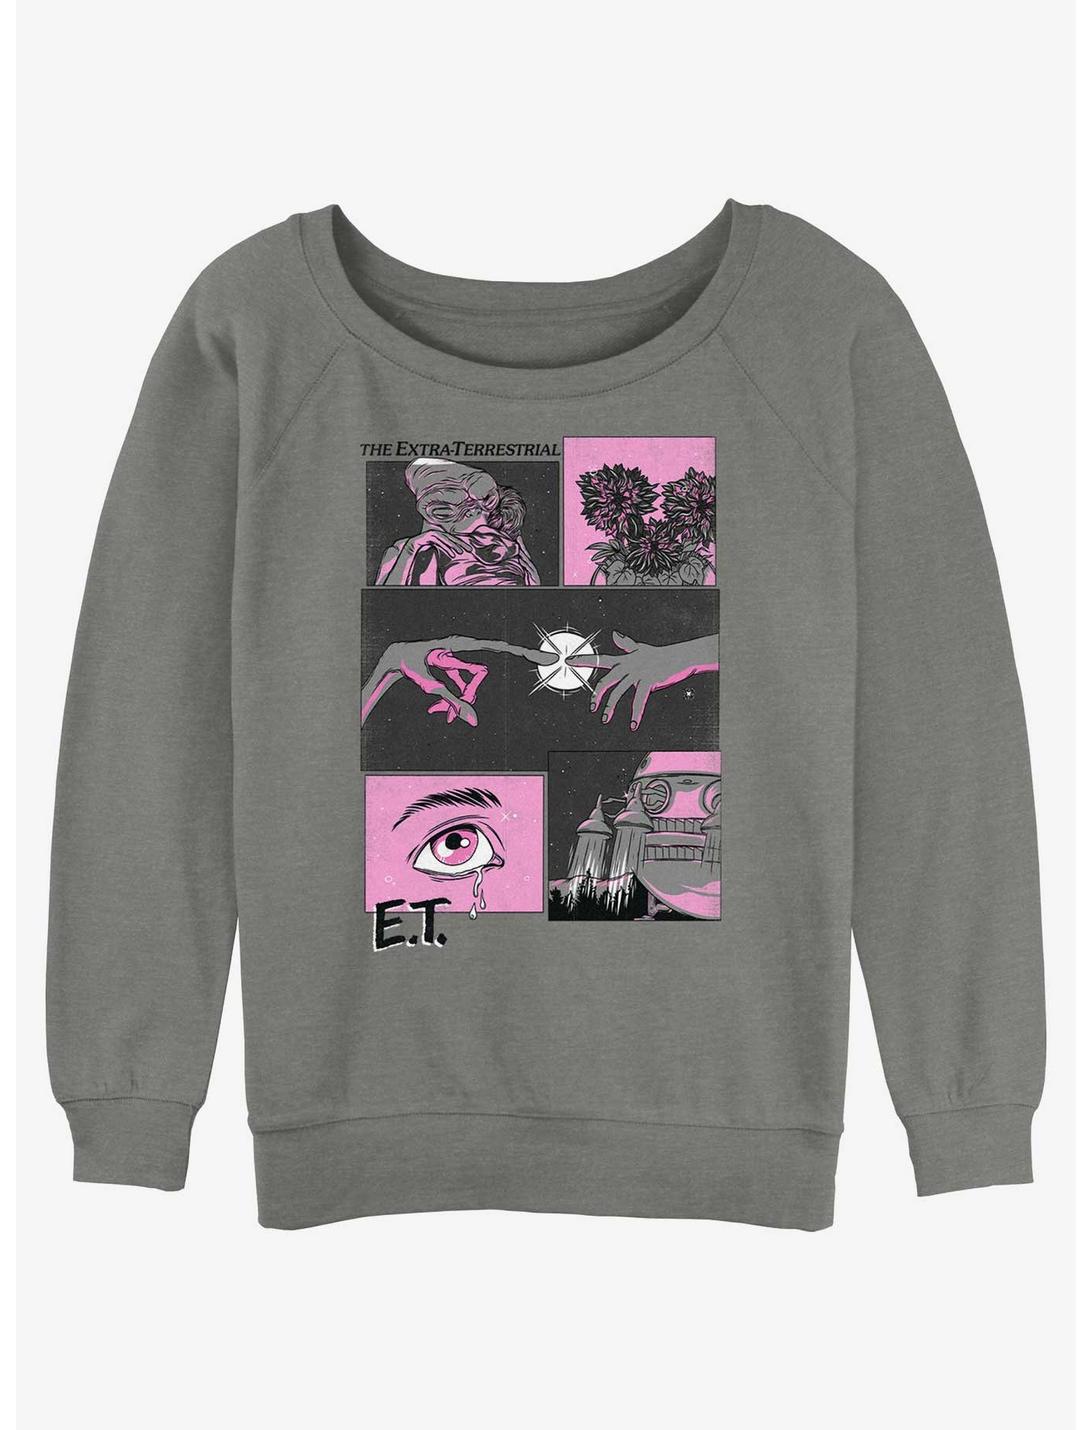 E.T. the Extra-Terrestrial Poster Womens Slouchy Sweatshirt, GRAY HTR, hi-res